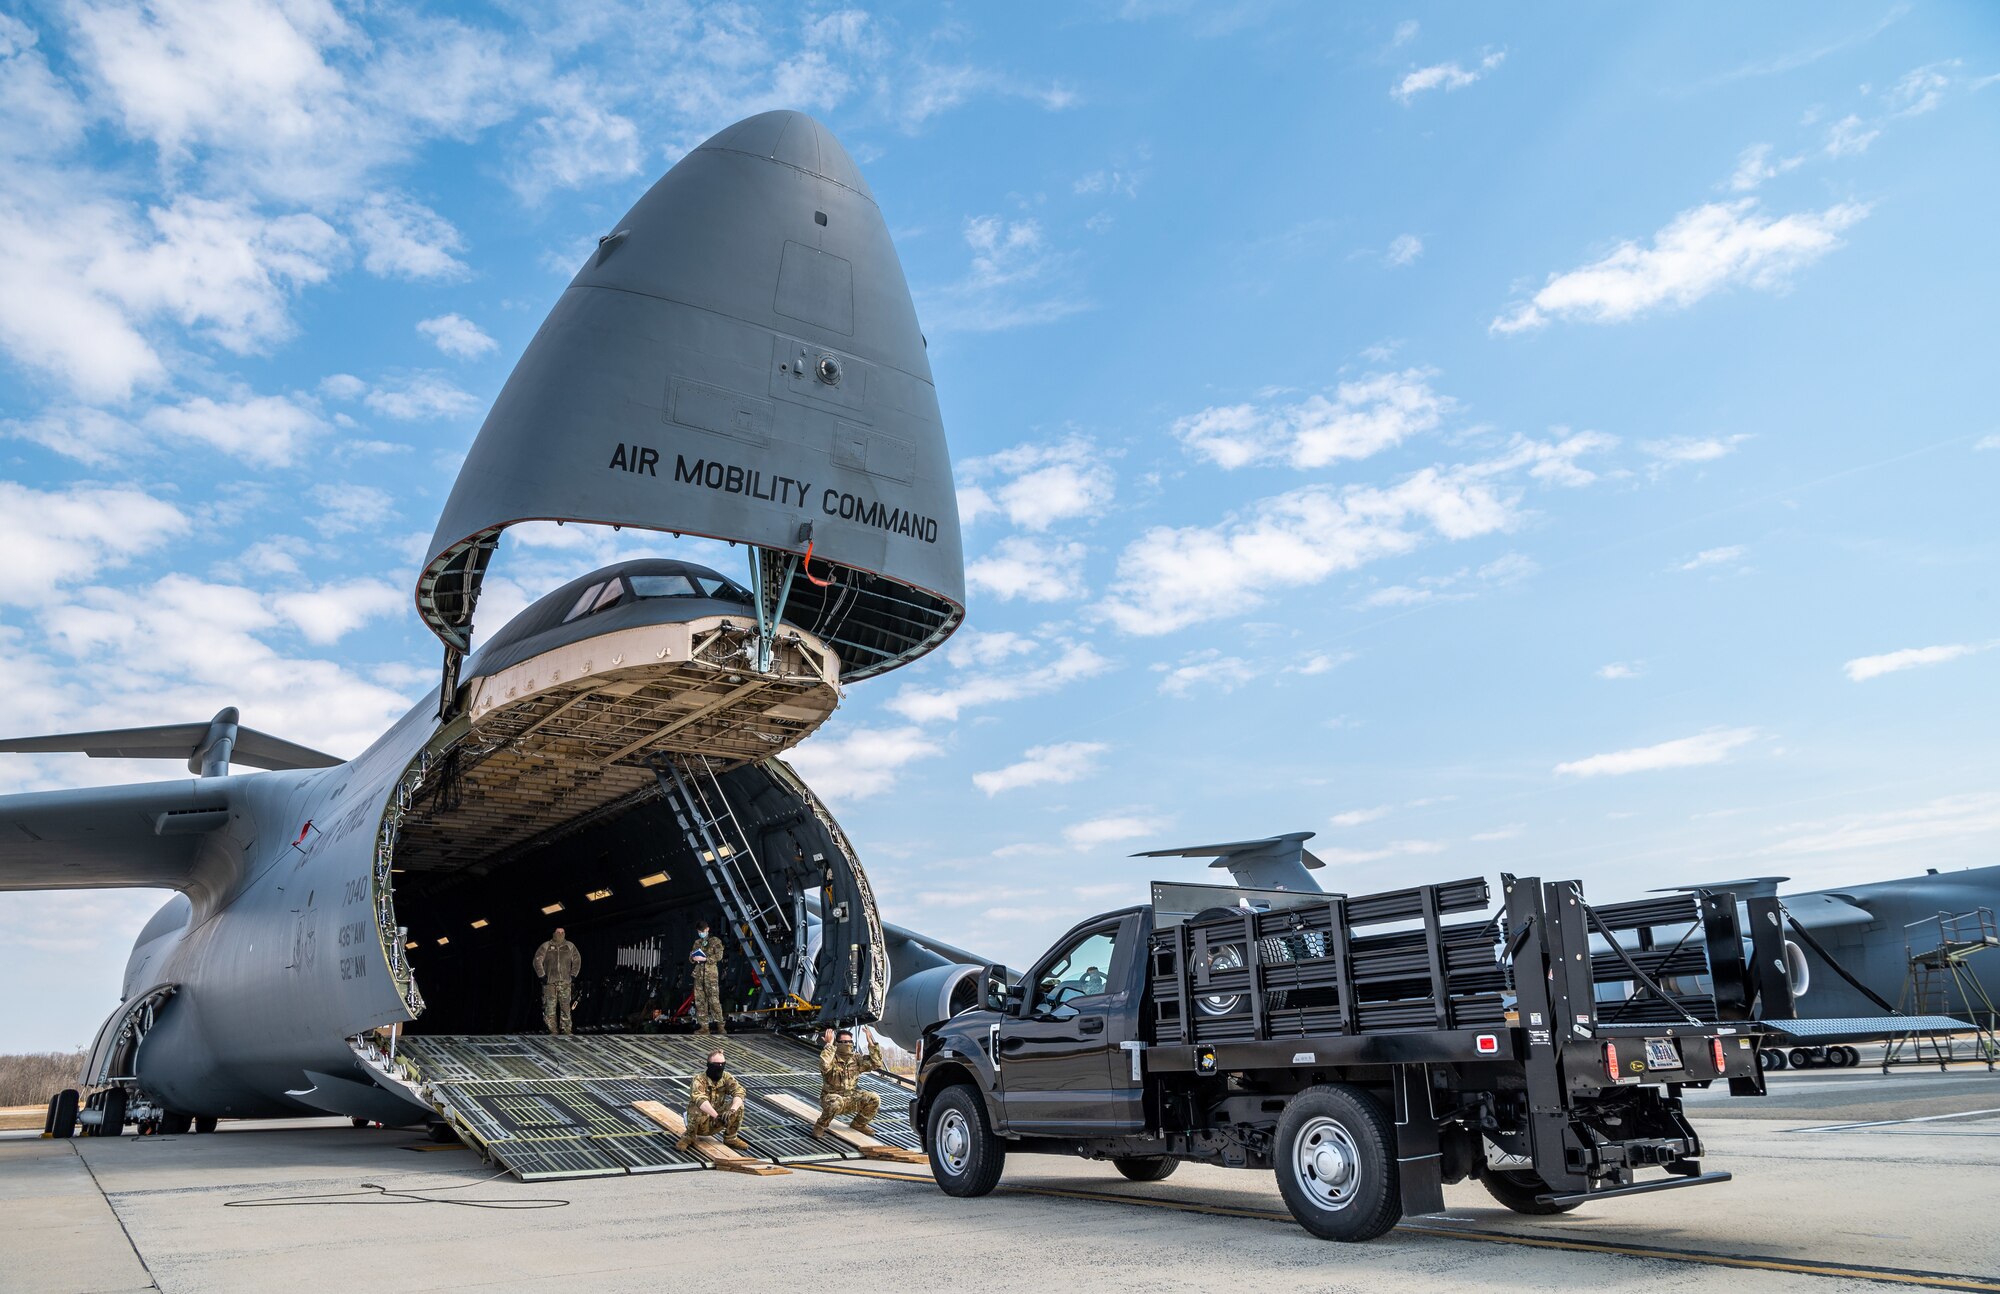 A stake-bed truck is loaded onto a C-5M Super Galaxy during loadmaster training at Dover Air Force Base, Delaware, March 9, 2021. Loadmasters from the 9th Airlift Squadron participated in the training as part of a Major Command Service Tail Trainer initiative driven by Air Mobility Command. The training expedites C-5 loadmaster upgrade training, enabling Dover AFB to provide rapid global airlift. (U.S. Air Force photo by Senior Airman Christopher Quail)